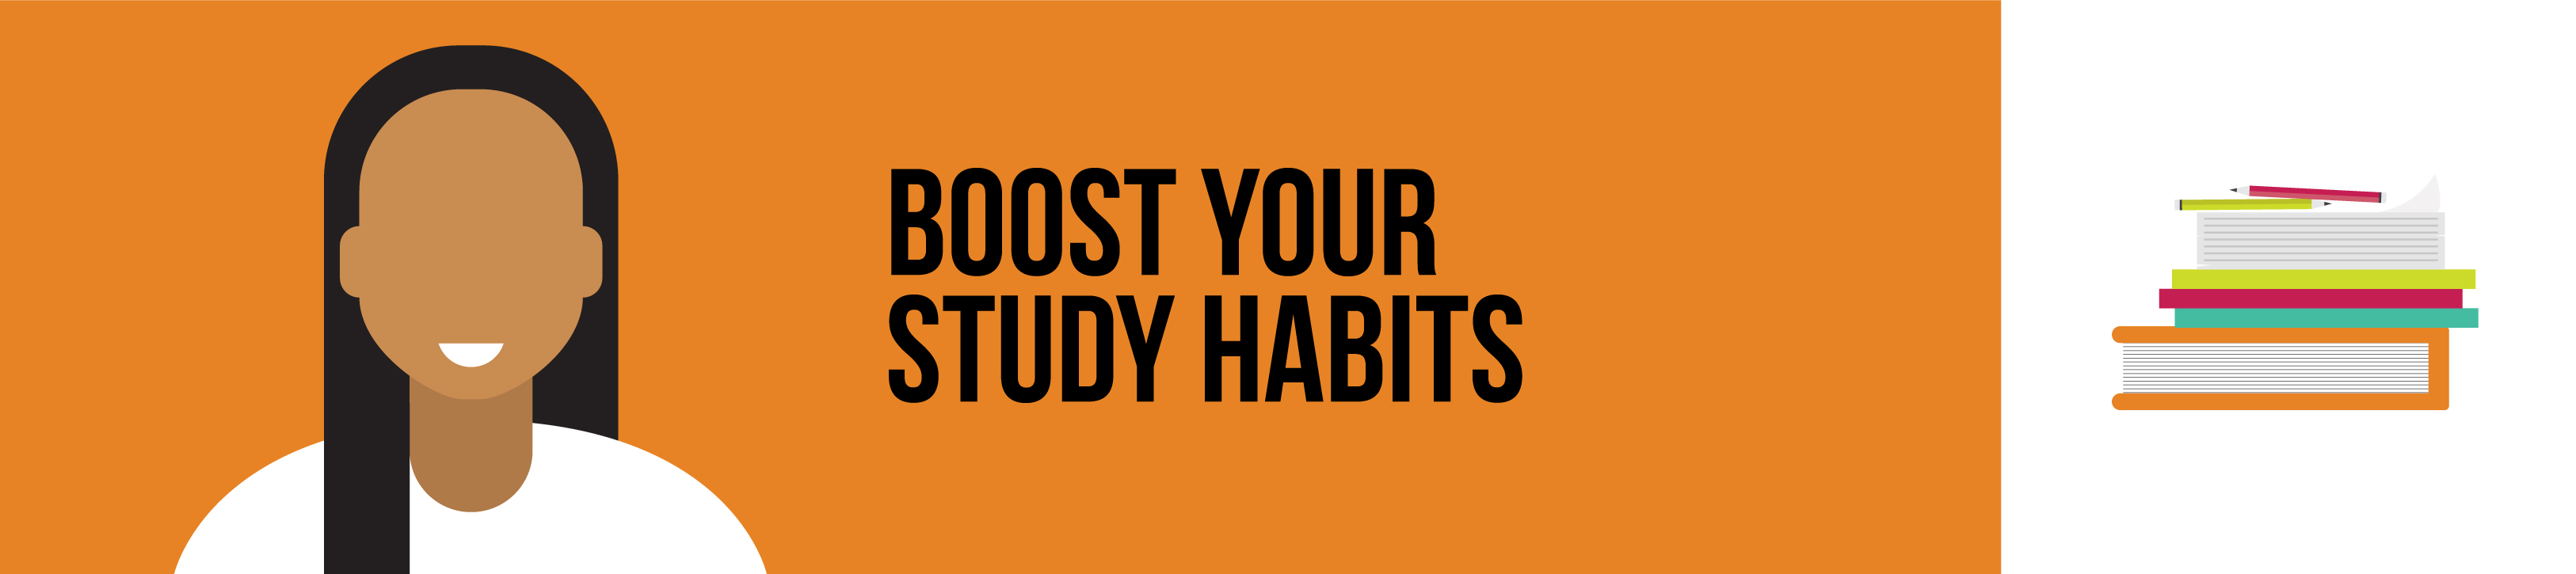 boost your study habits